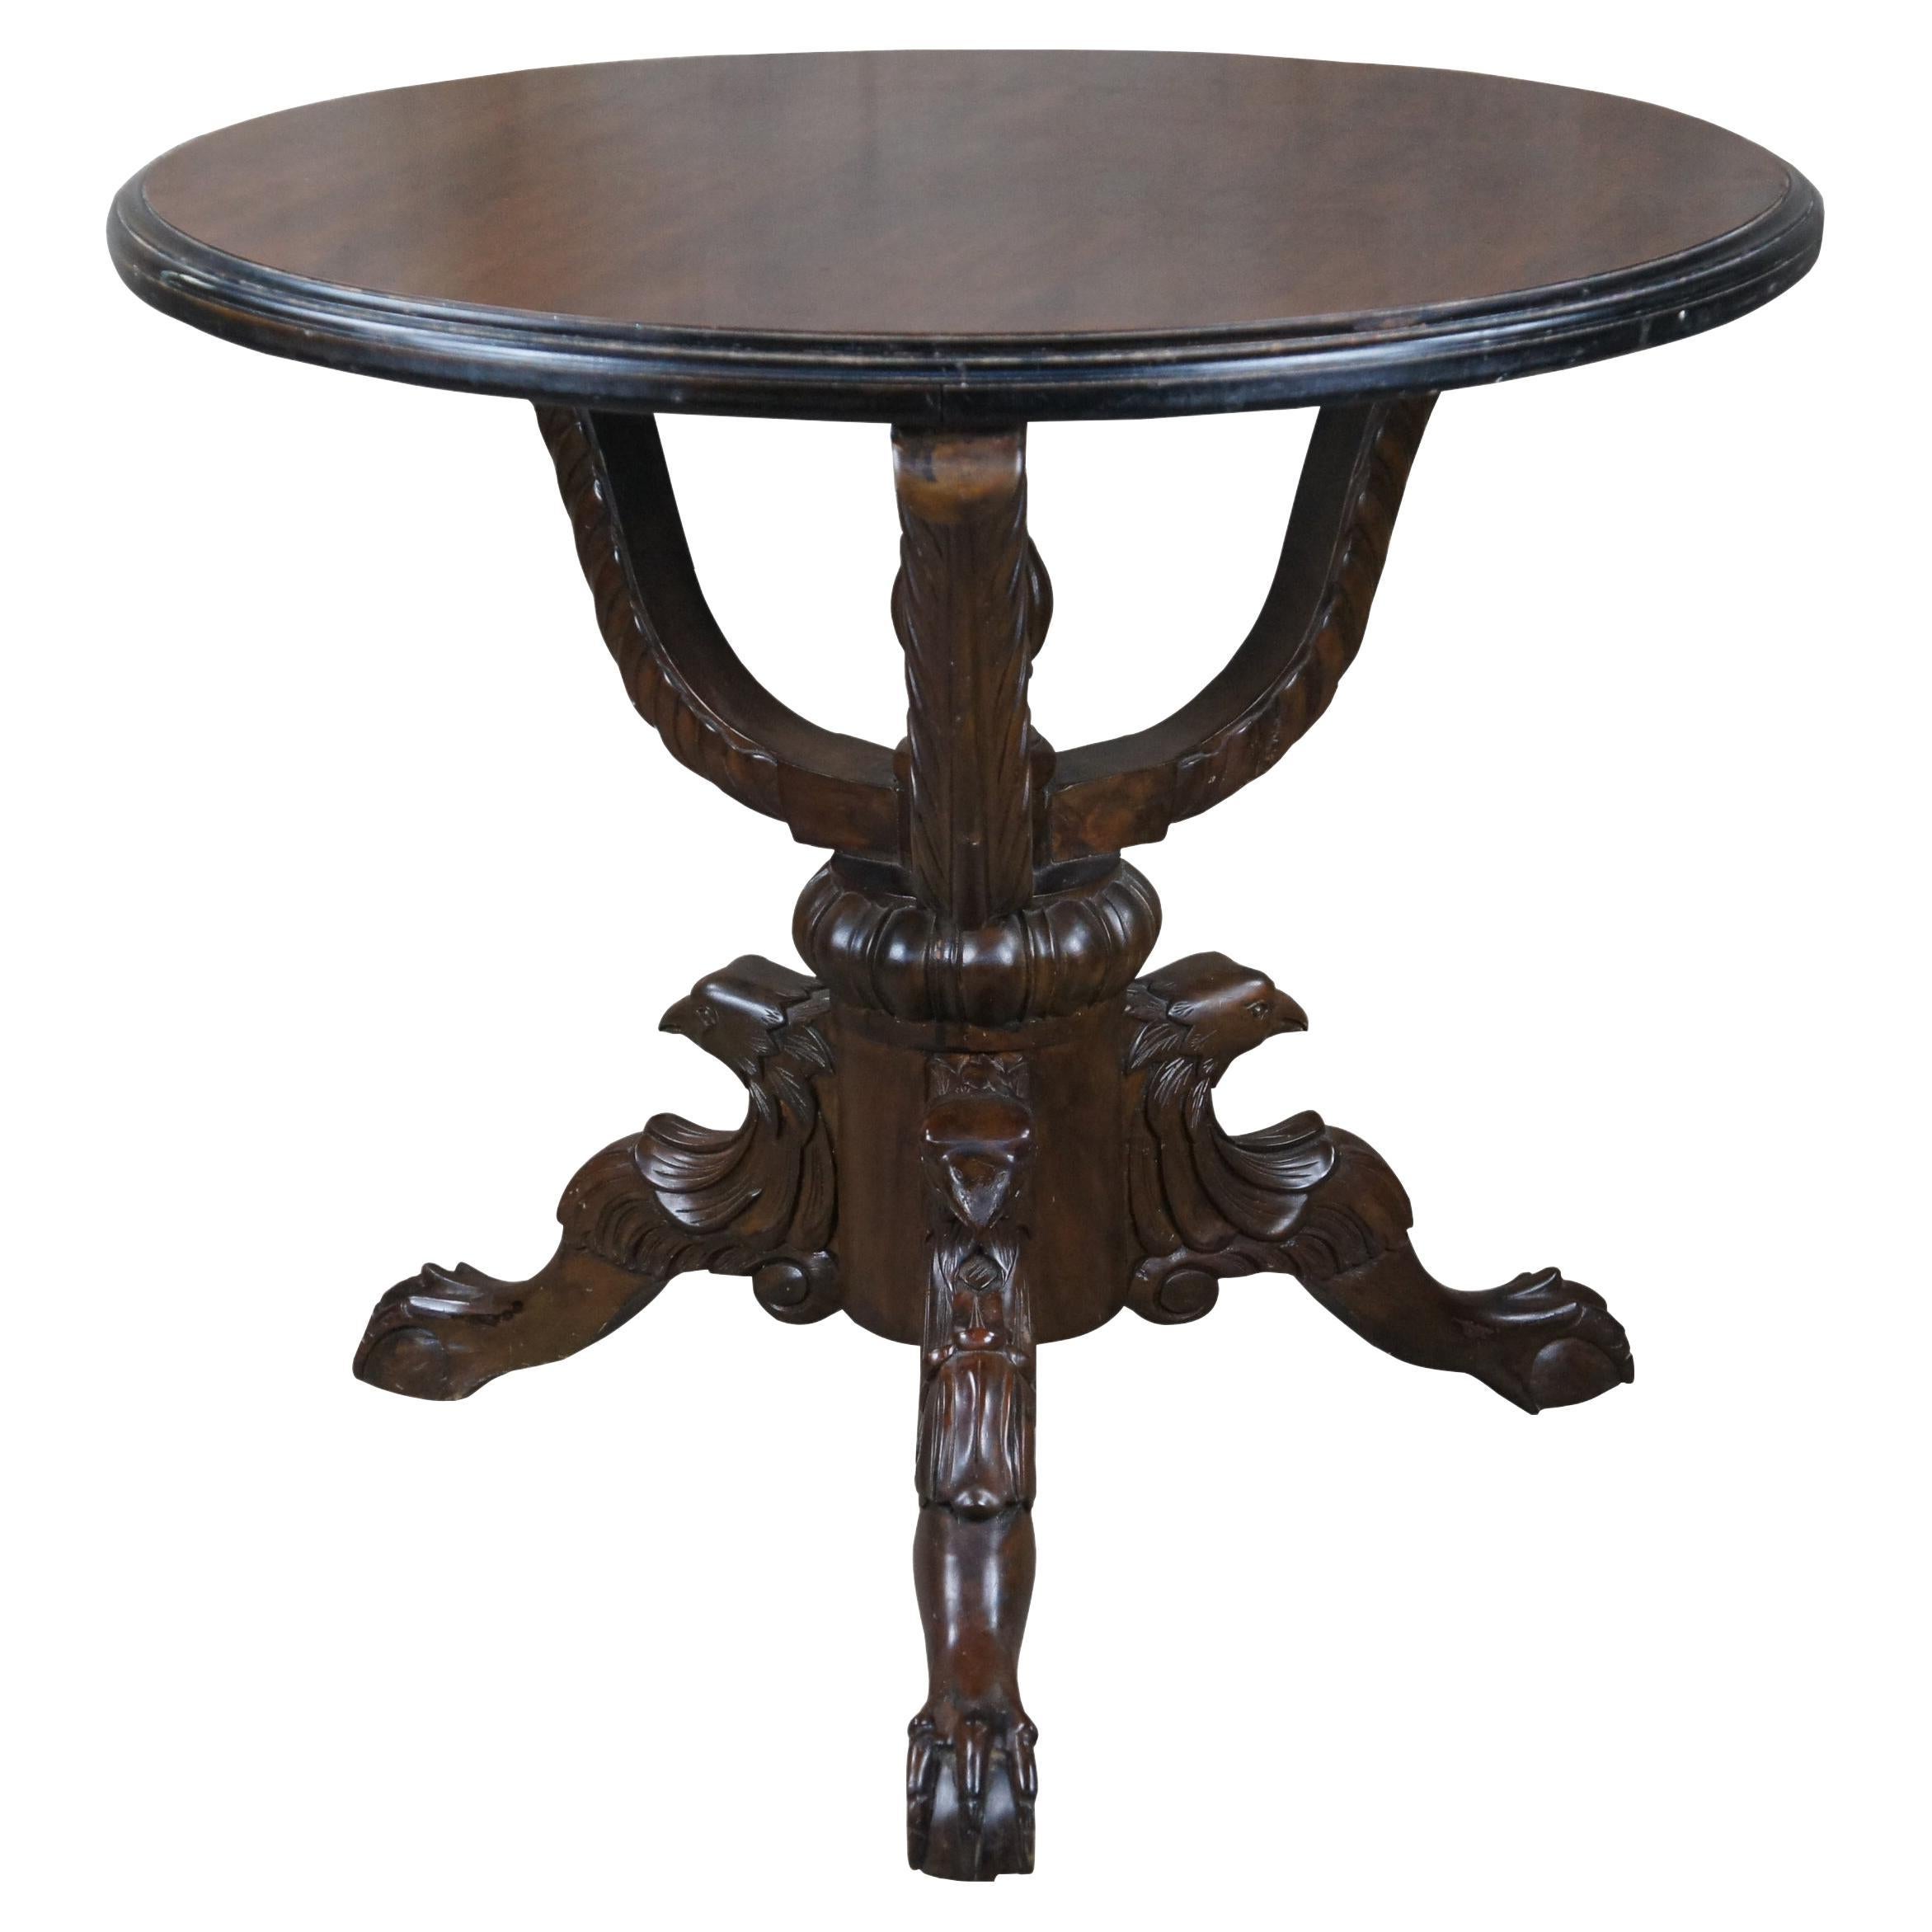 American Empire Carved Mahogany Eagle Ball Claw Pedestal Center Table 32" For Sale